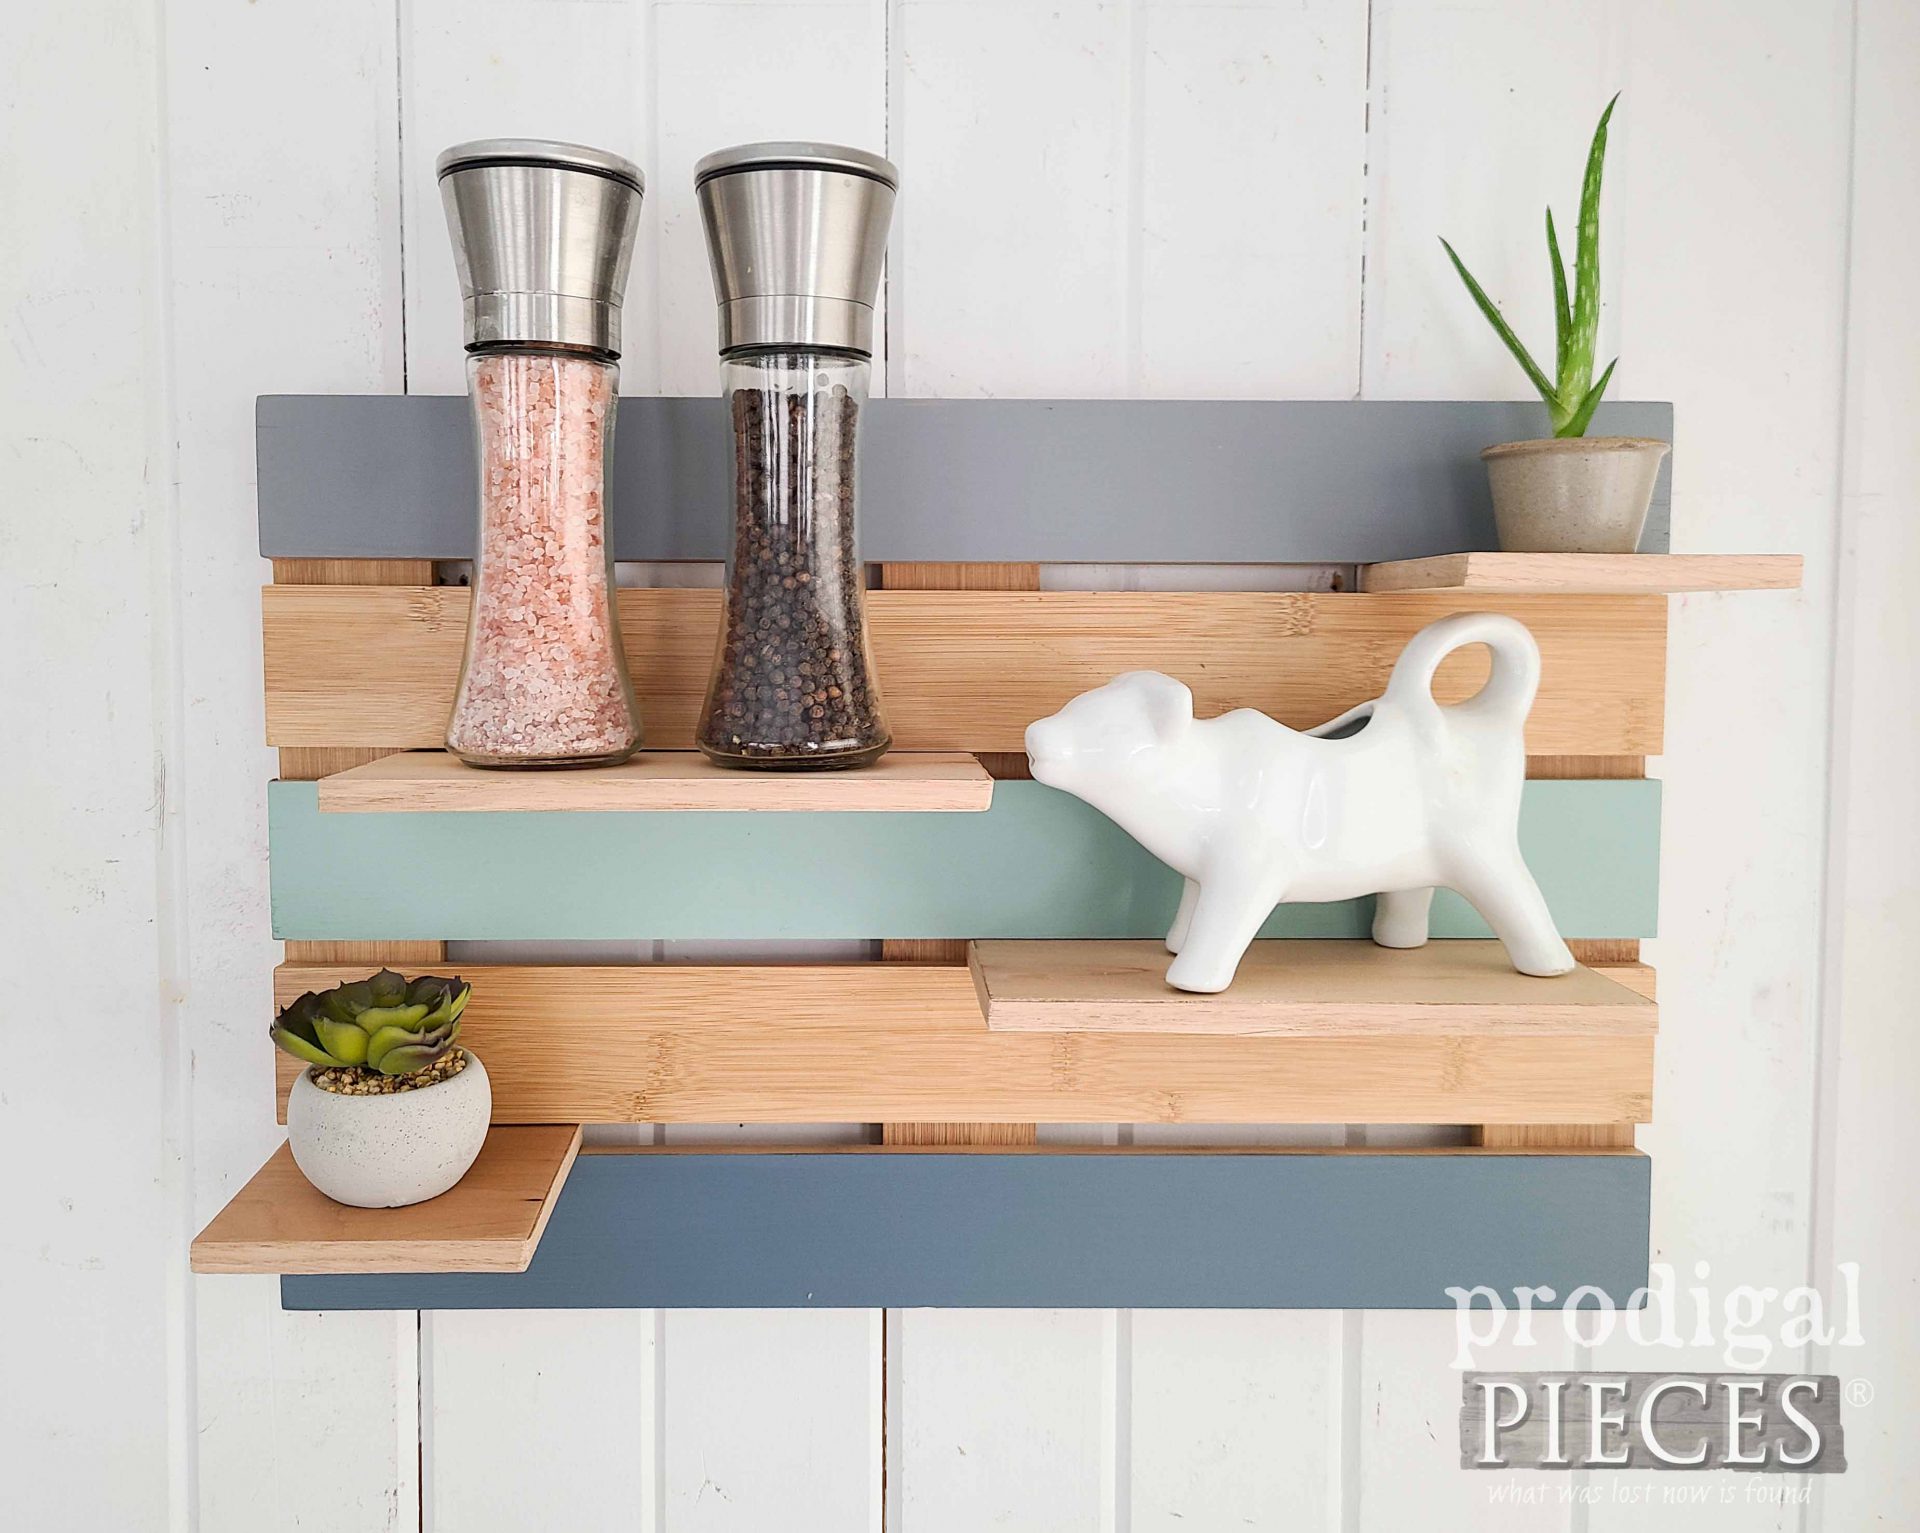 Wooden Repurposed Trivet Wall Shelf with Accessories by Larissa of Prodigal Pieces | prodigalpieces.com #prodigalpieces #upcycled #boho #modernfarmhouse #kitchen